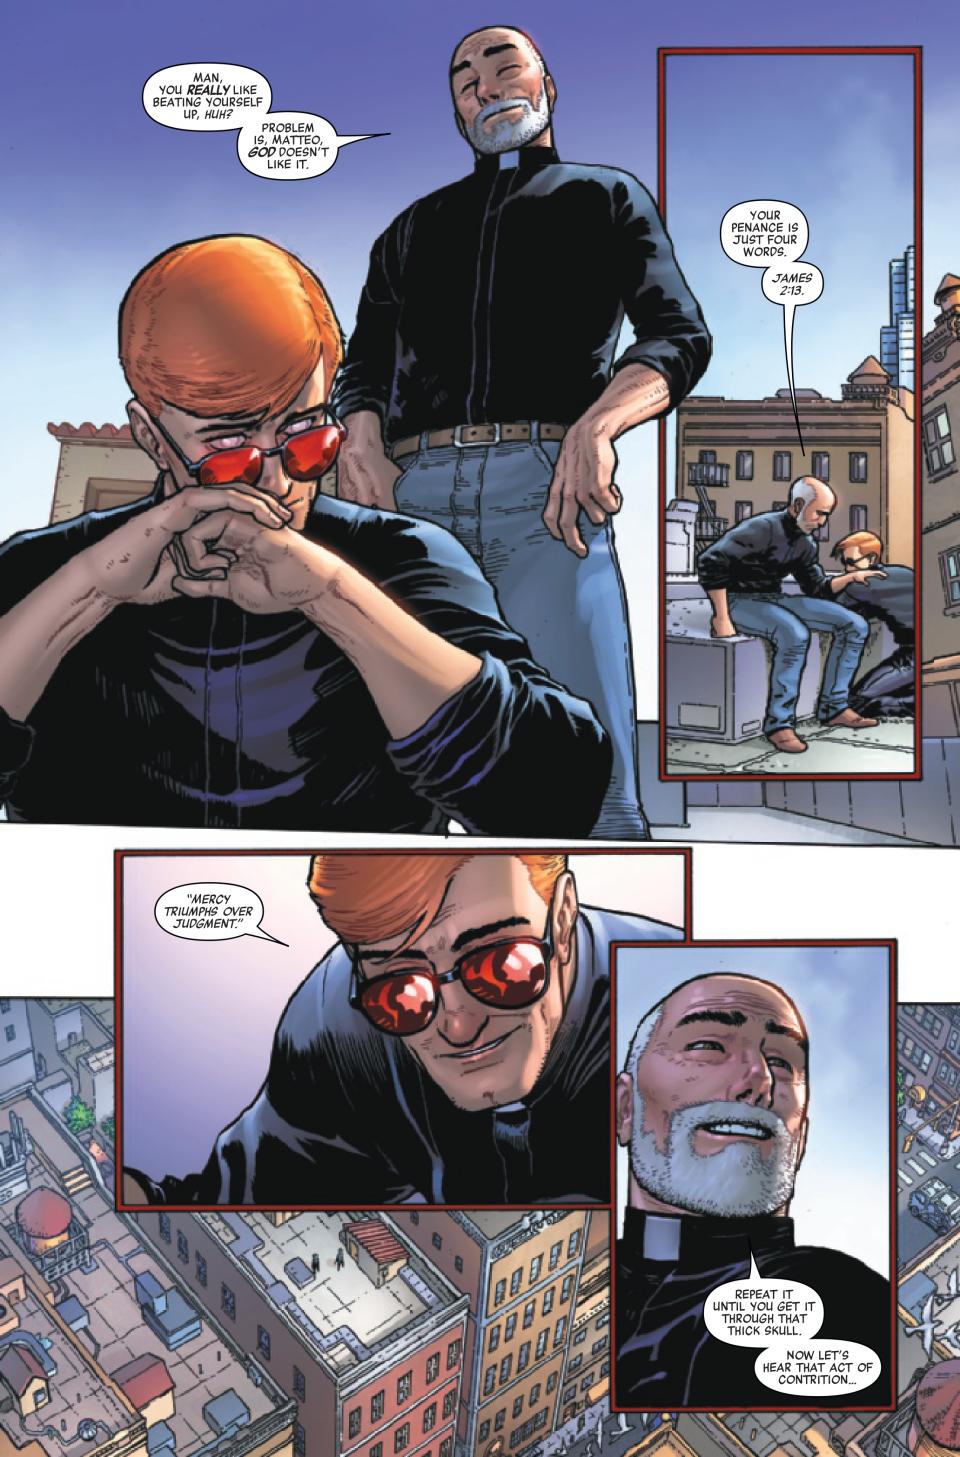 Pages from Daredevil #6